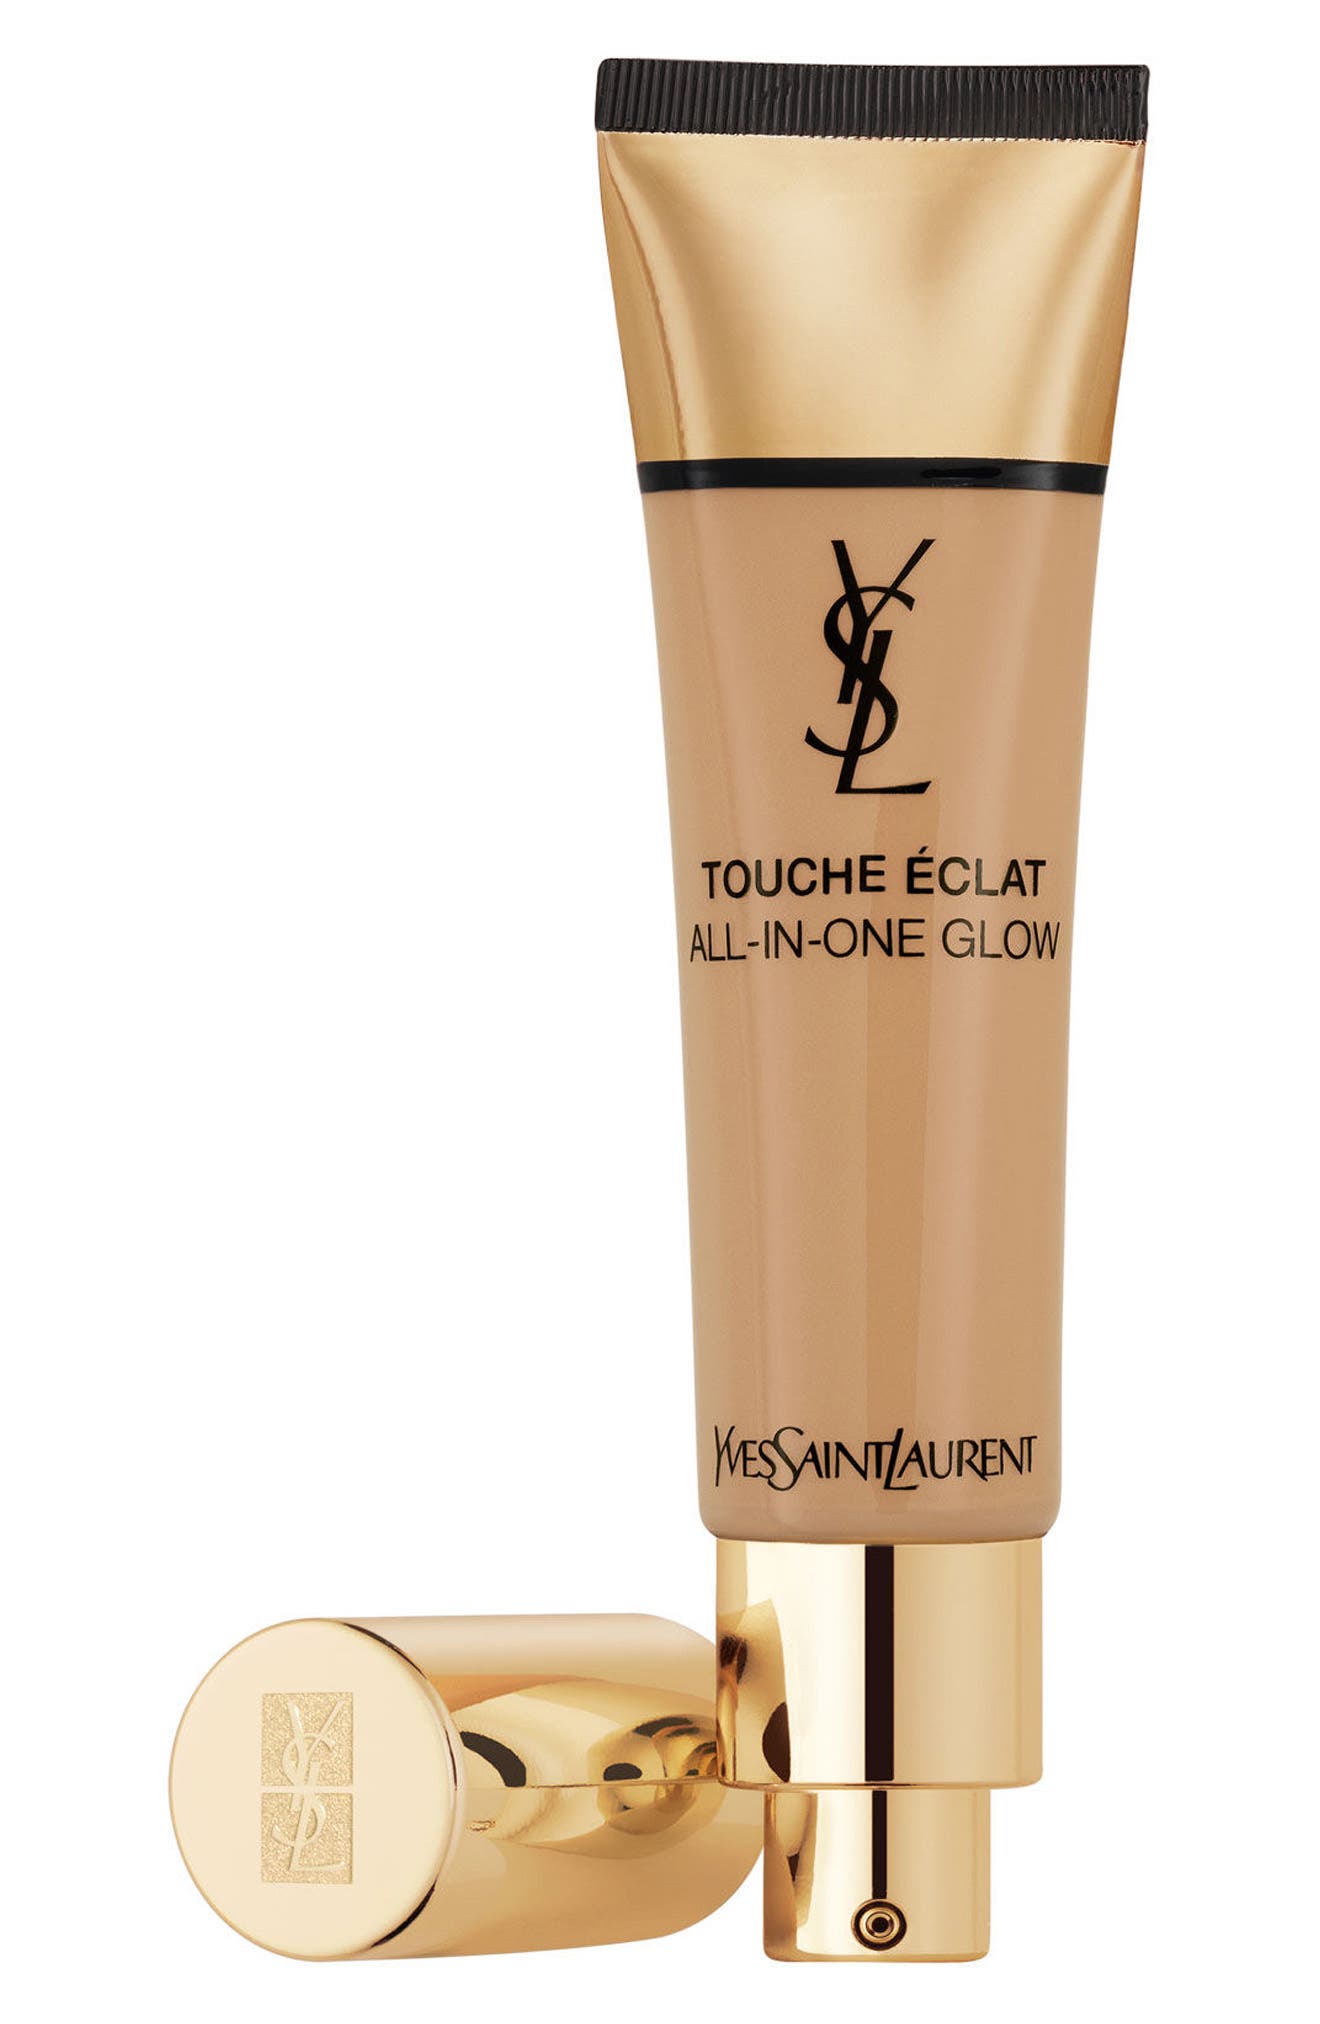 Yves Saint Laurent Touche Eclat All-In-One Glow Liquid Foundation Broad Spectrum SPF 23 in B60 Amber